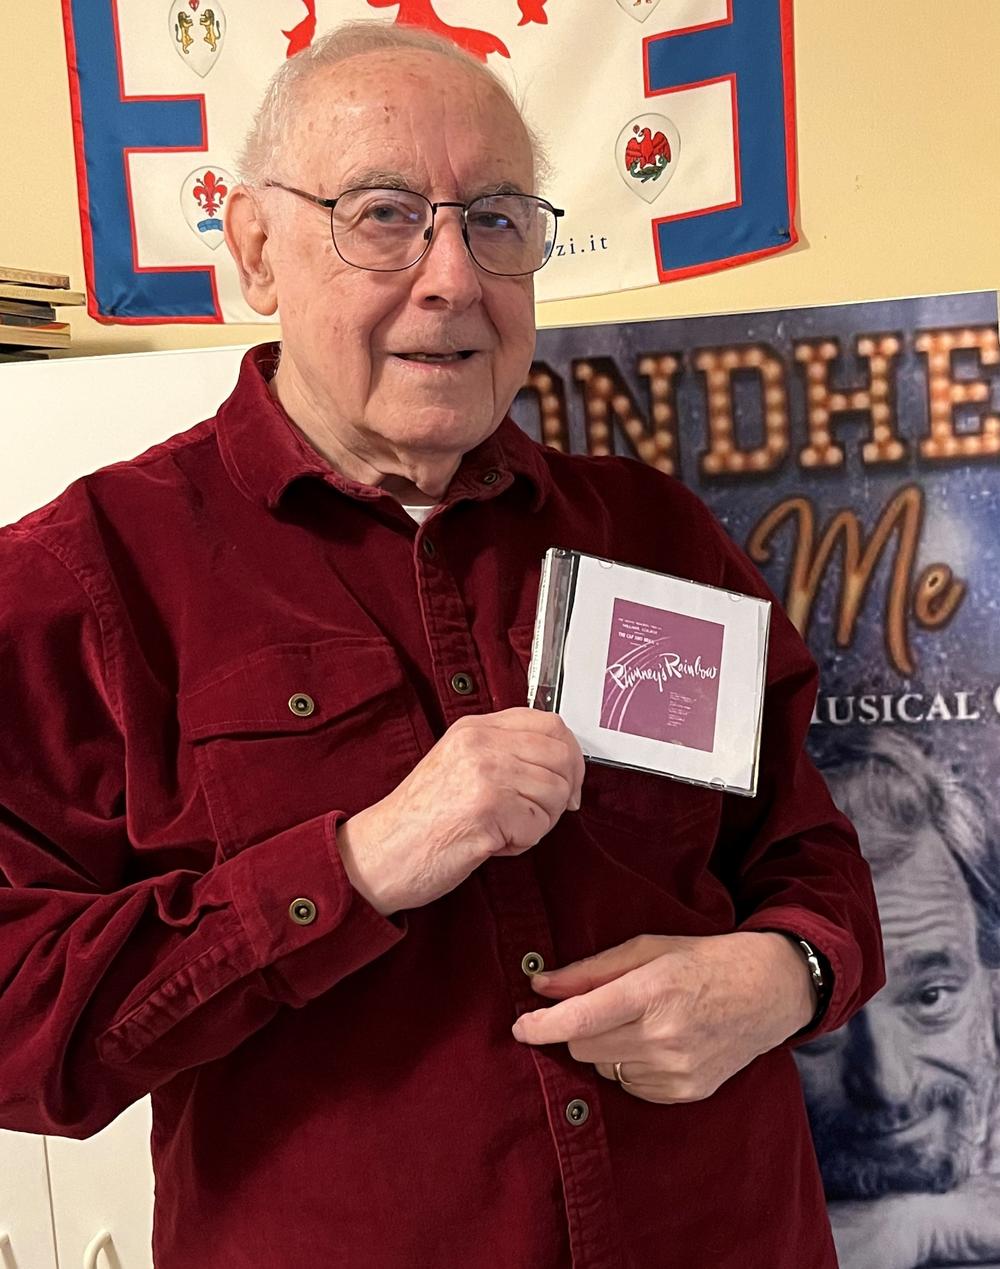 Journalist Paul Salsini holds the CD containing a rare live recording of <em>Phinney's Rainbow</em>. He found the CD while cleaning up his office.<em></em>